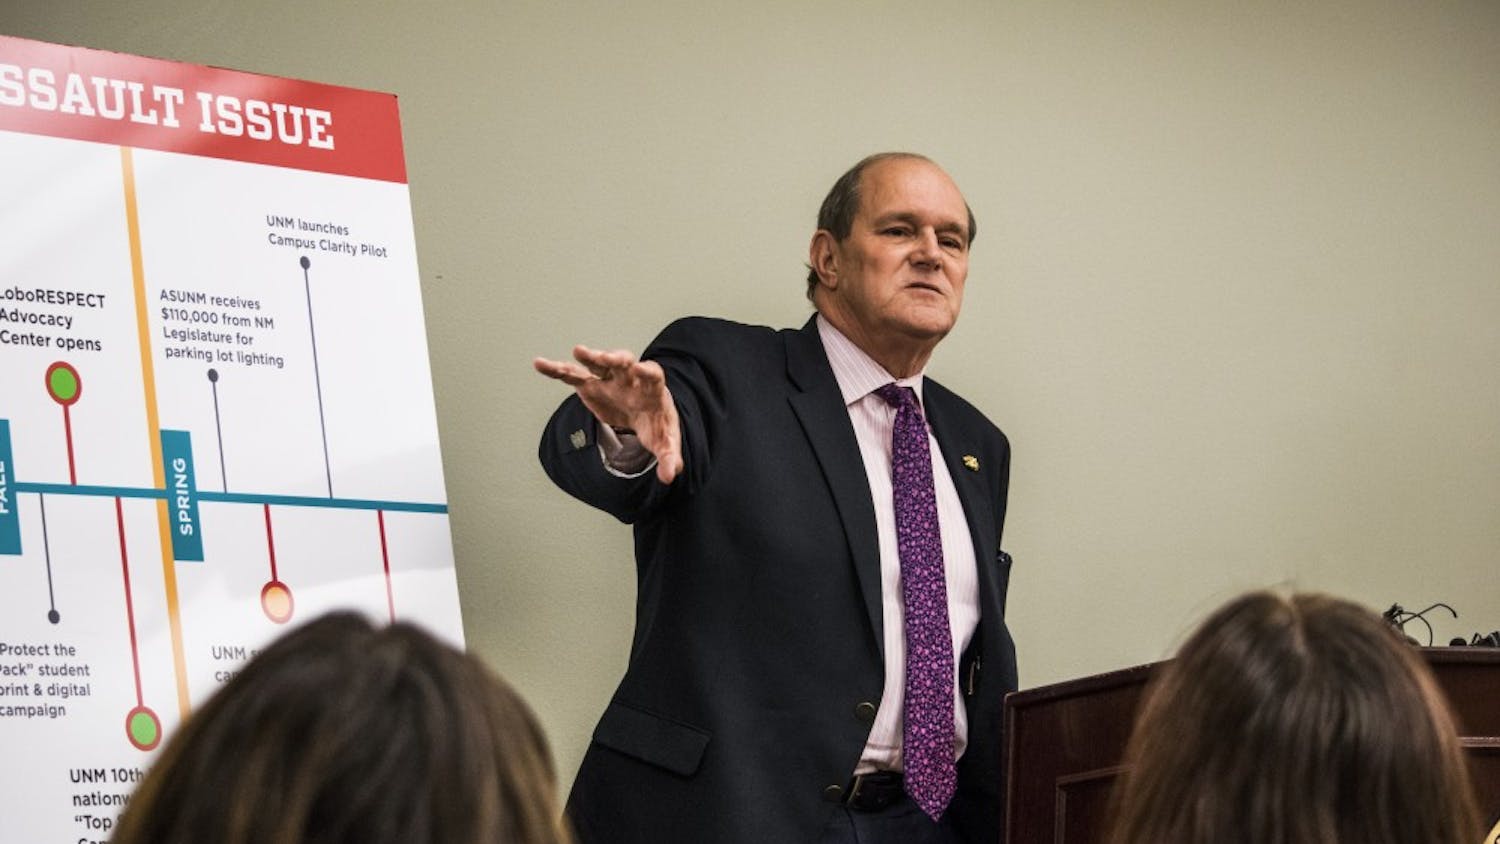 University President Robert G. Frank holds a conference addressing the Department of Justice's findings about sexual assault on UNM’s campus Friday afternoon at the SUB. Frank proposed the University’s future plans to help address sexual assault.